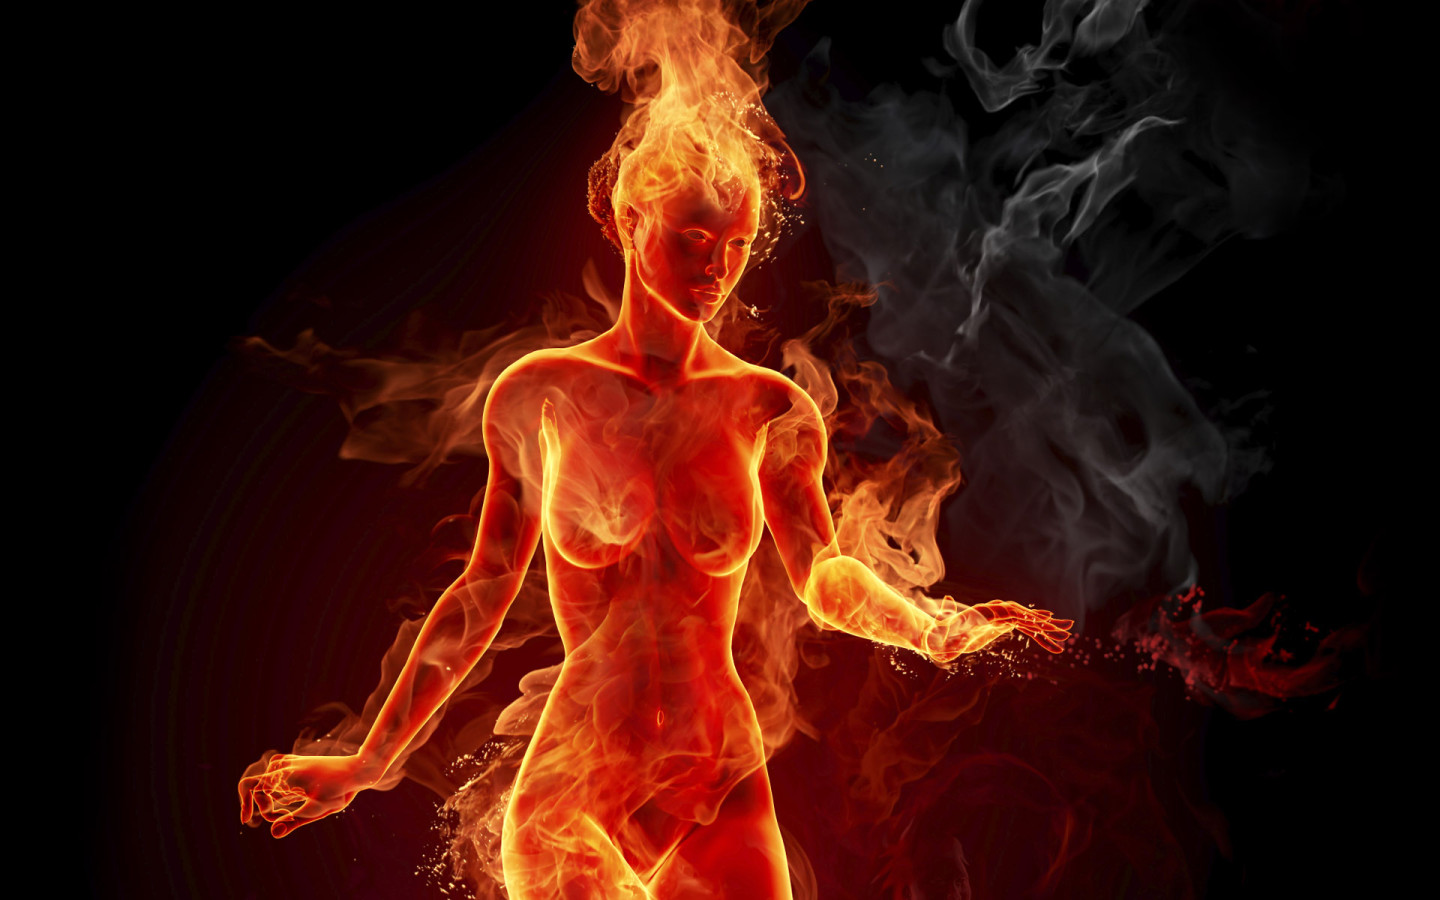 3D-graphics_Girl_in_fire_011323_